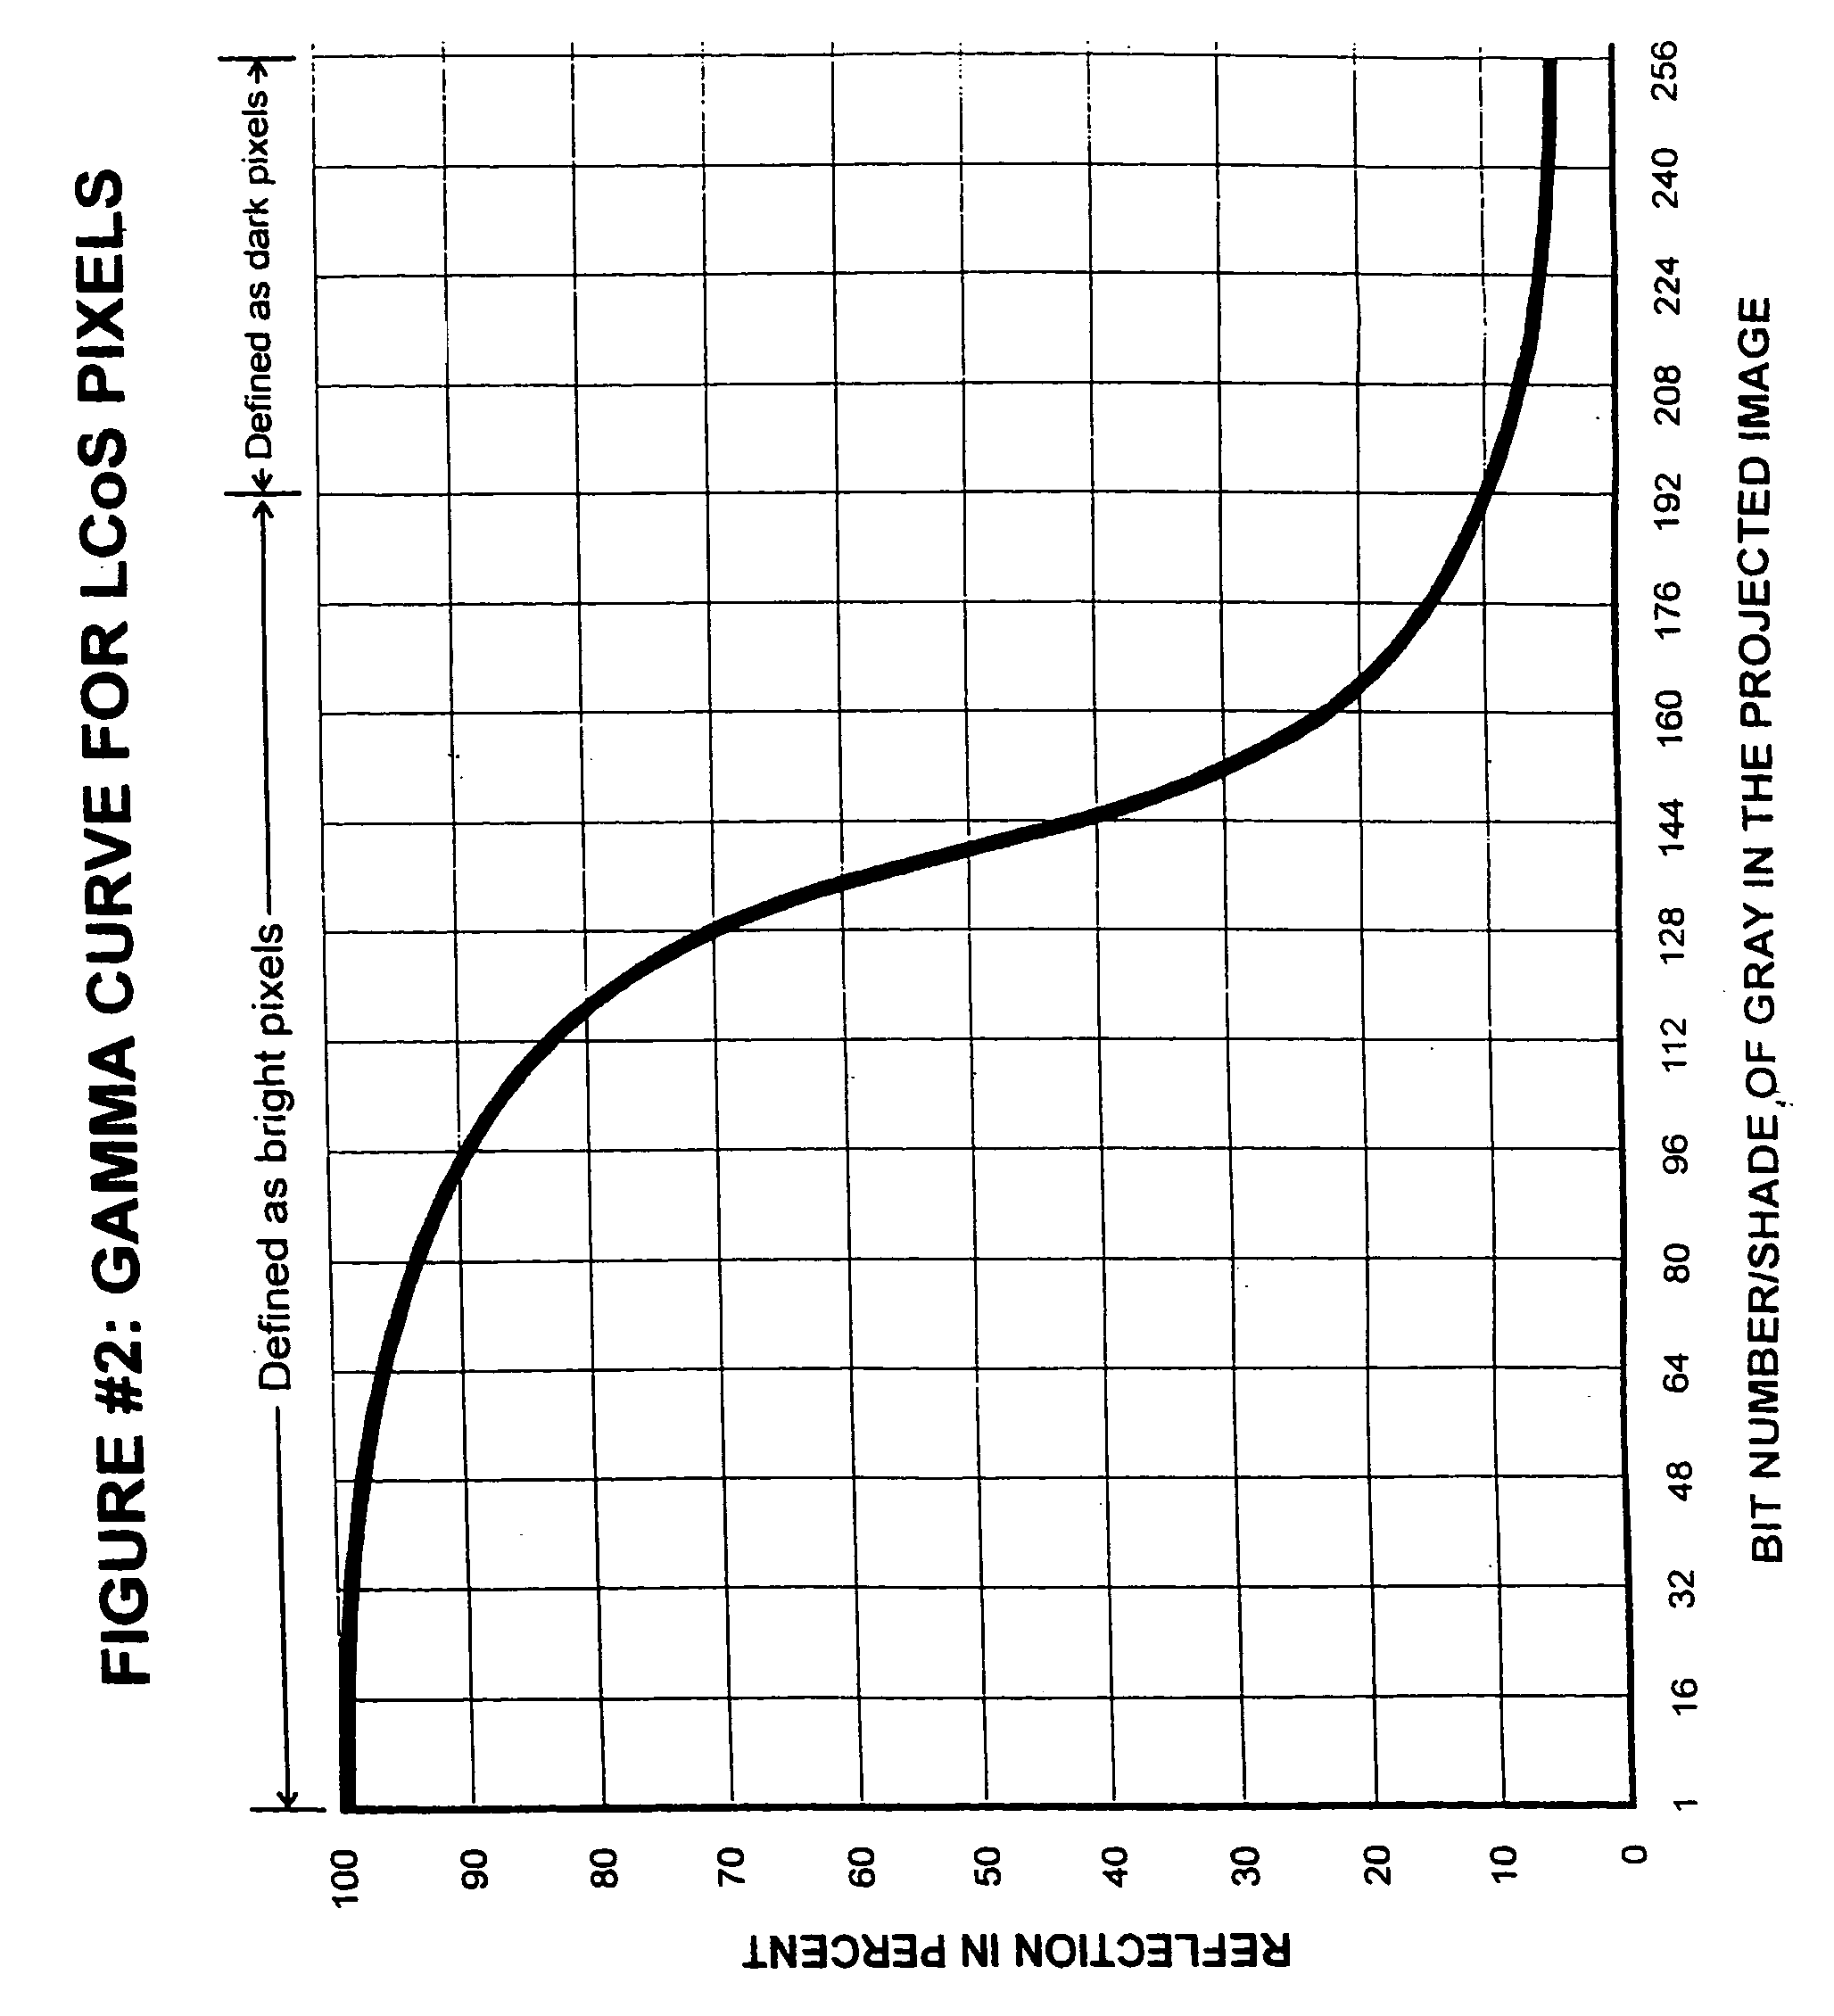 Method and apparatus to increase the contrast ratio of the image produced by a LCoS based light engine